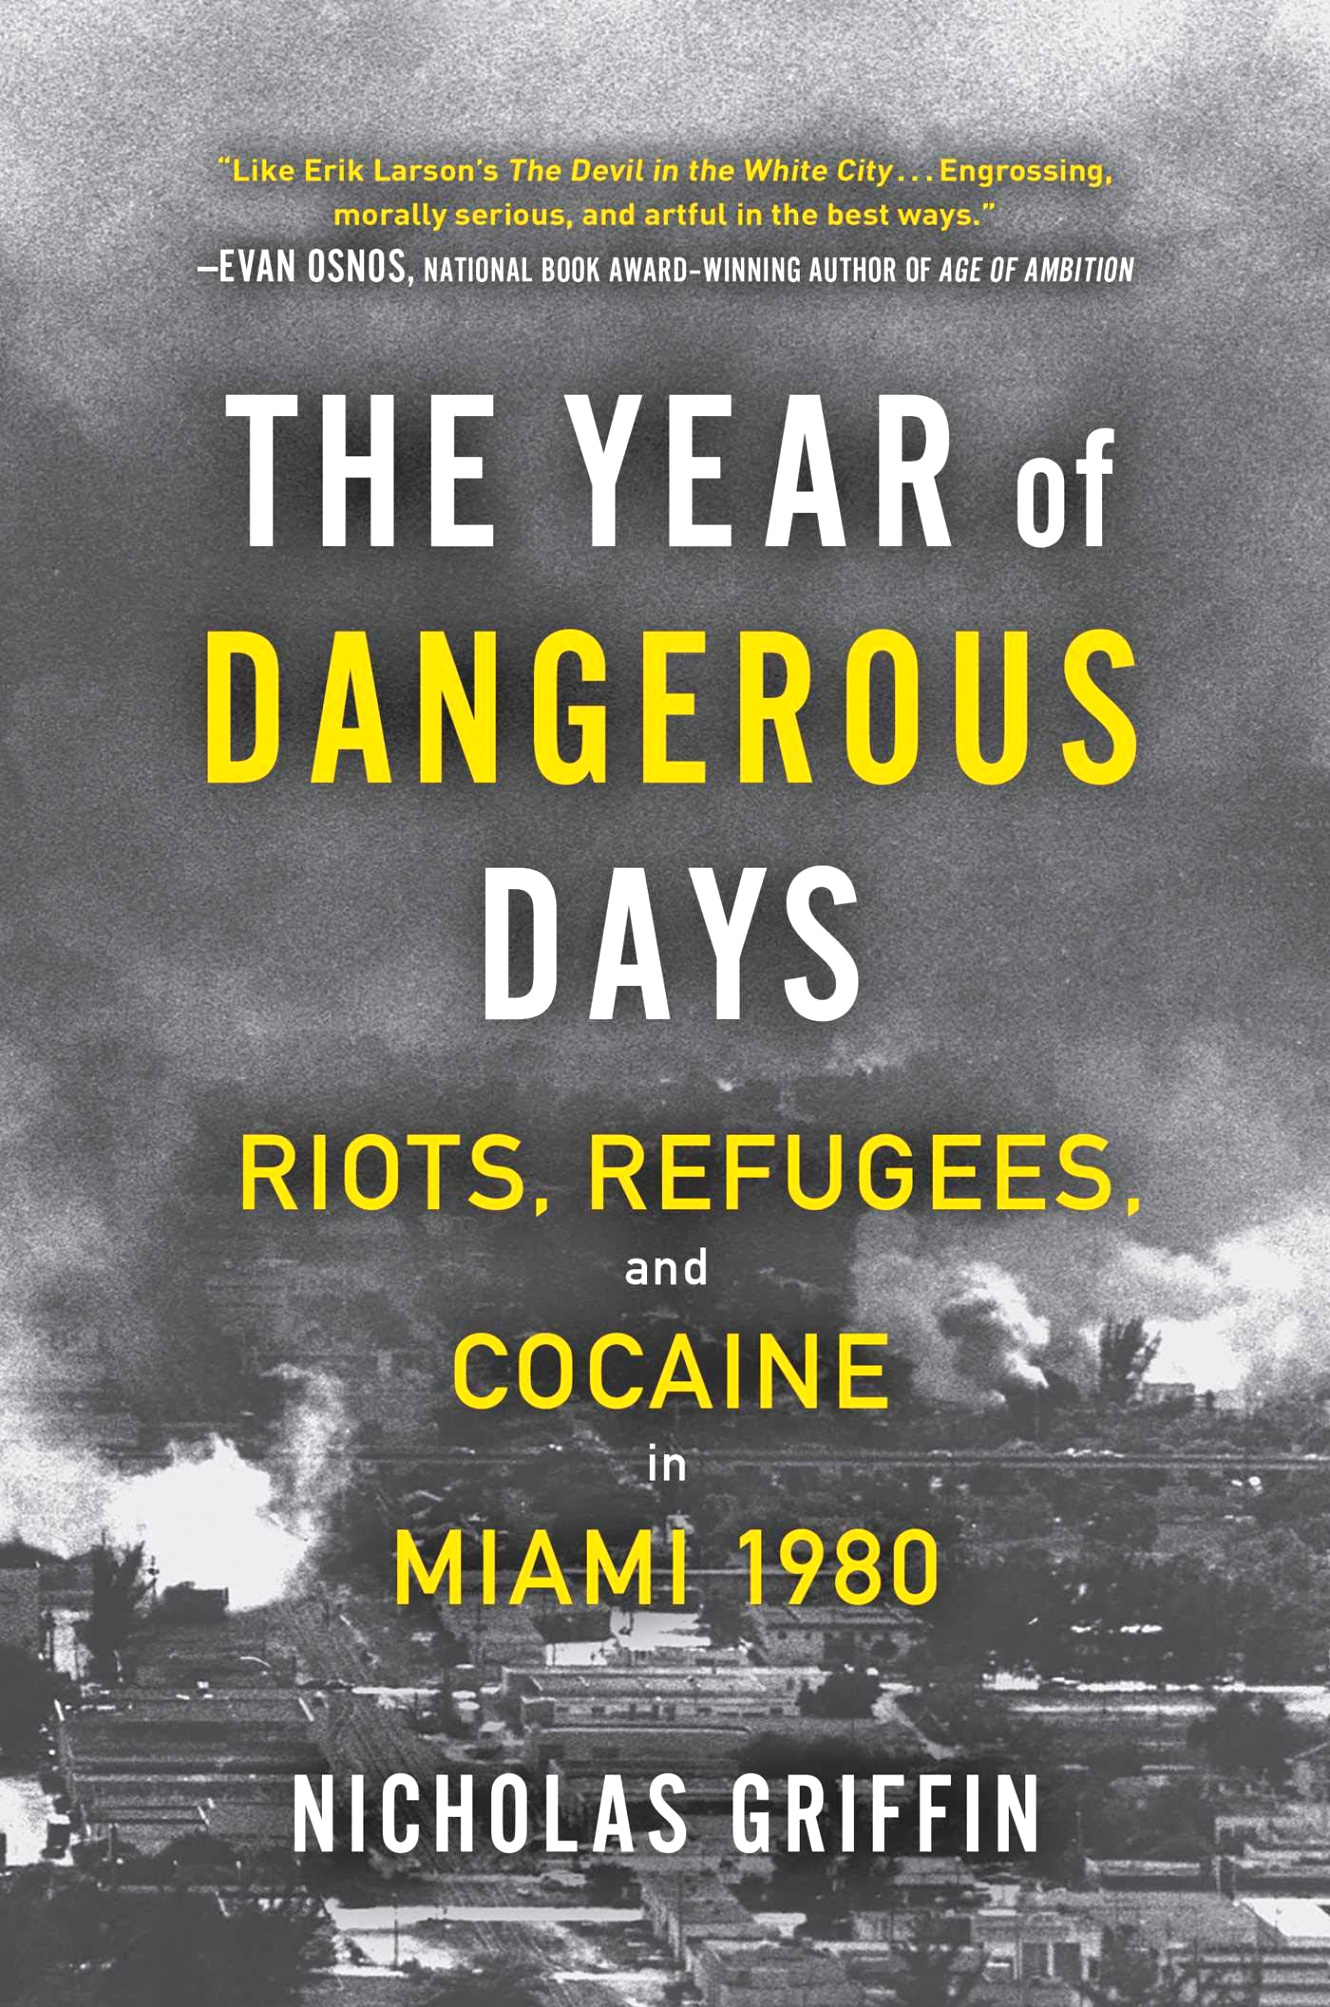 Car Rental software In Mcduffie Ga Dans the Year Of Dangerous Days: Riots, Refugees, and Cocaine In Miami 1980